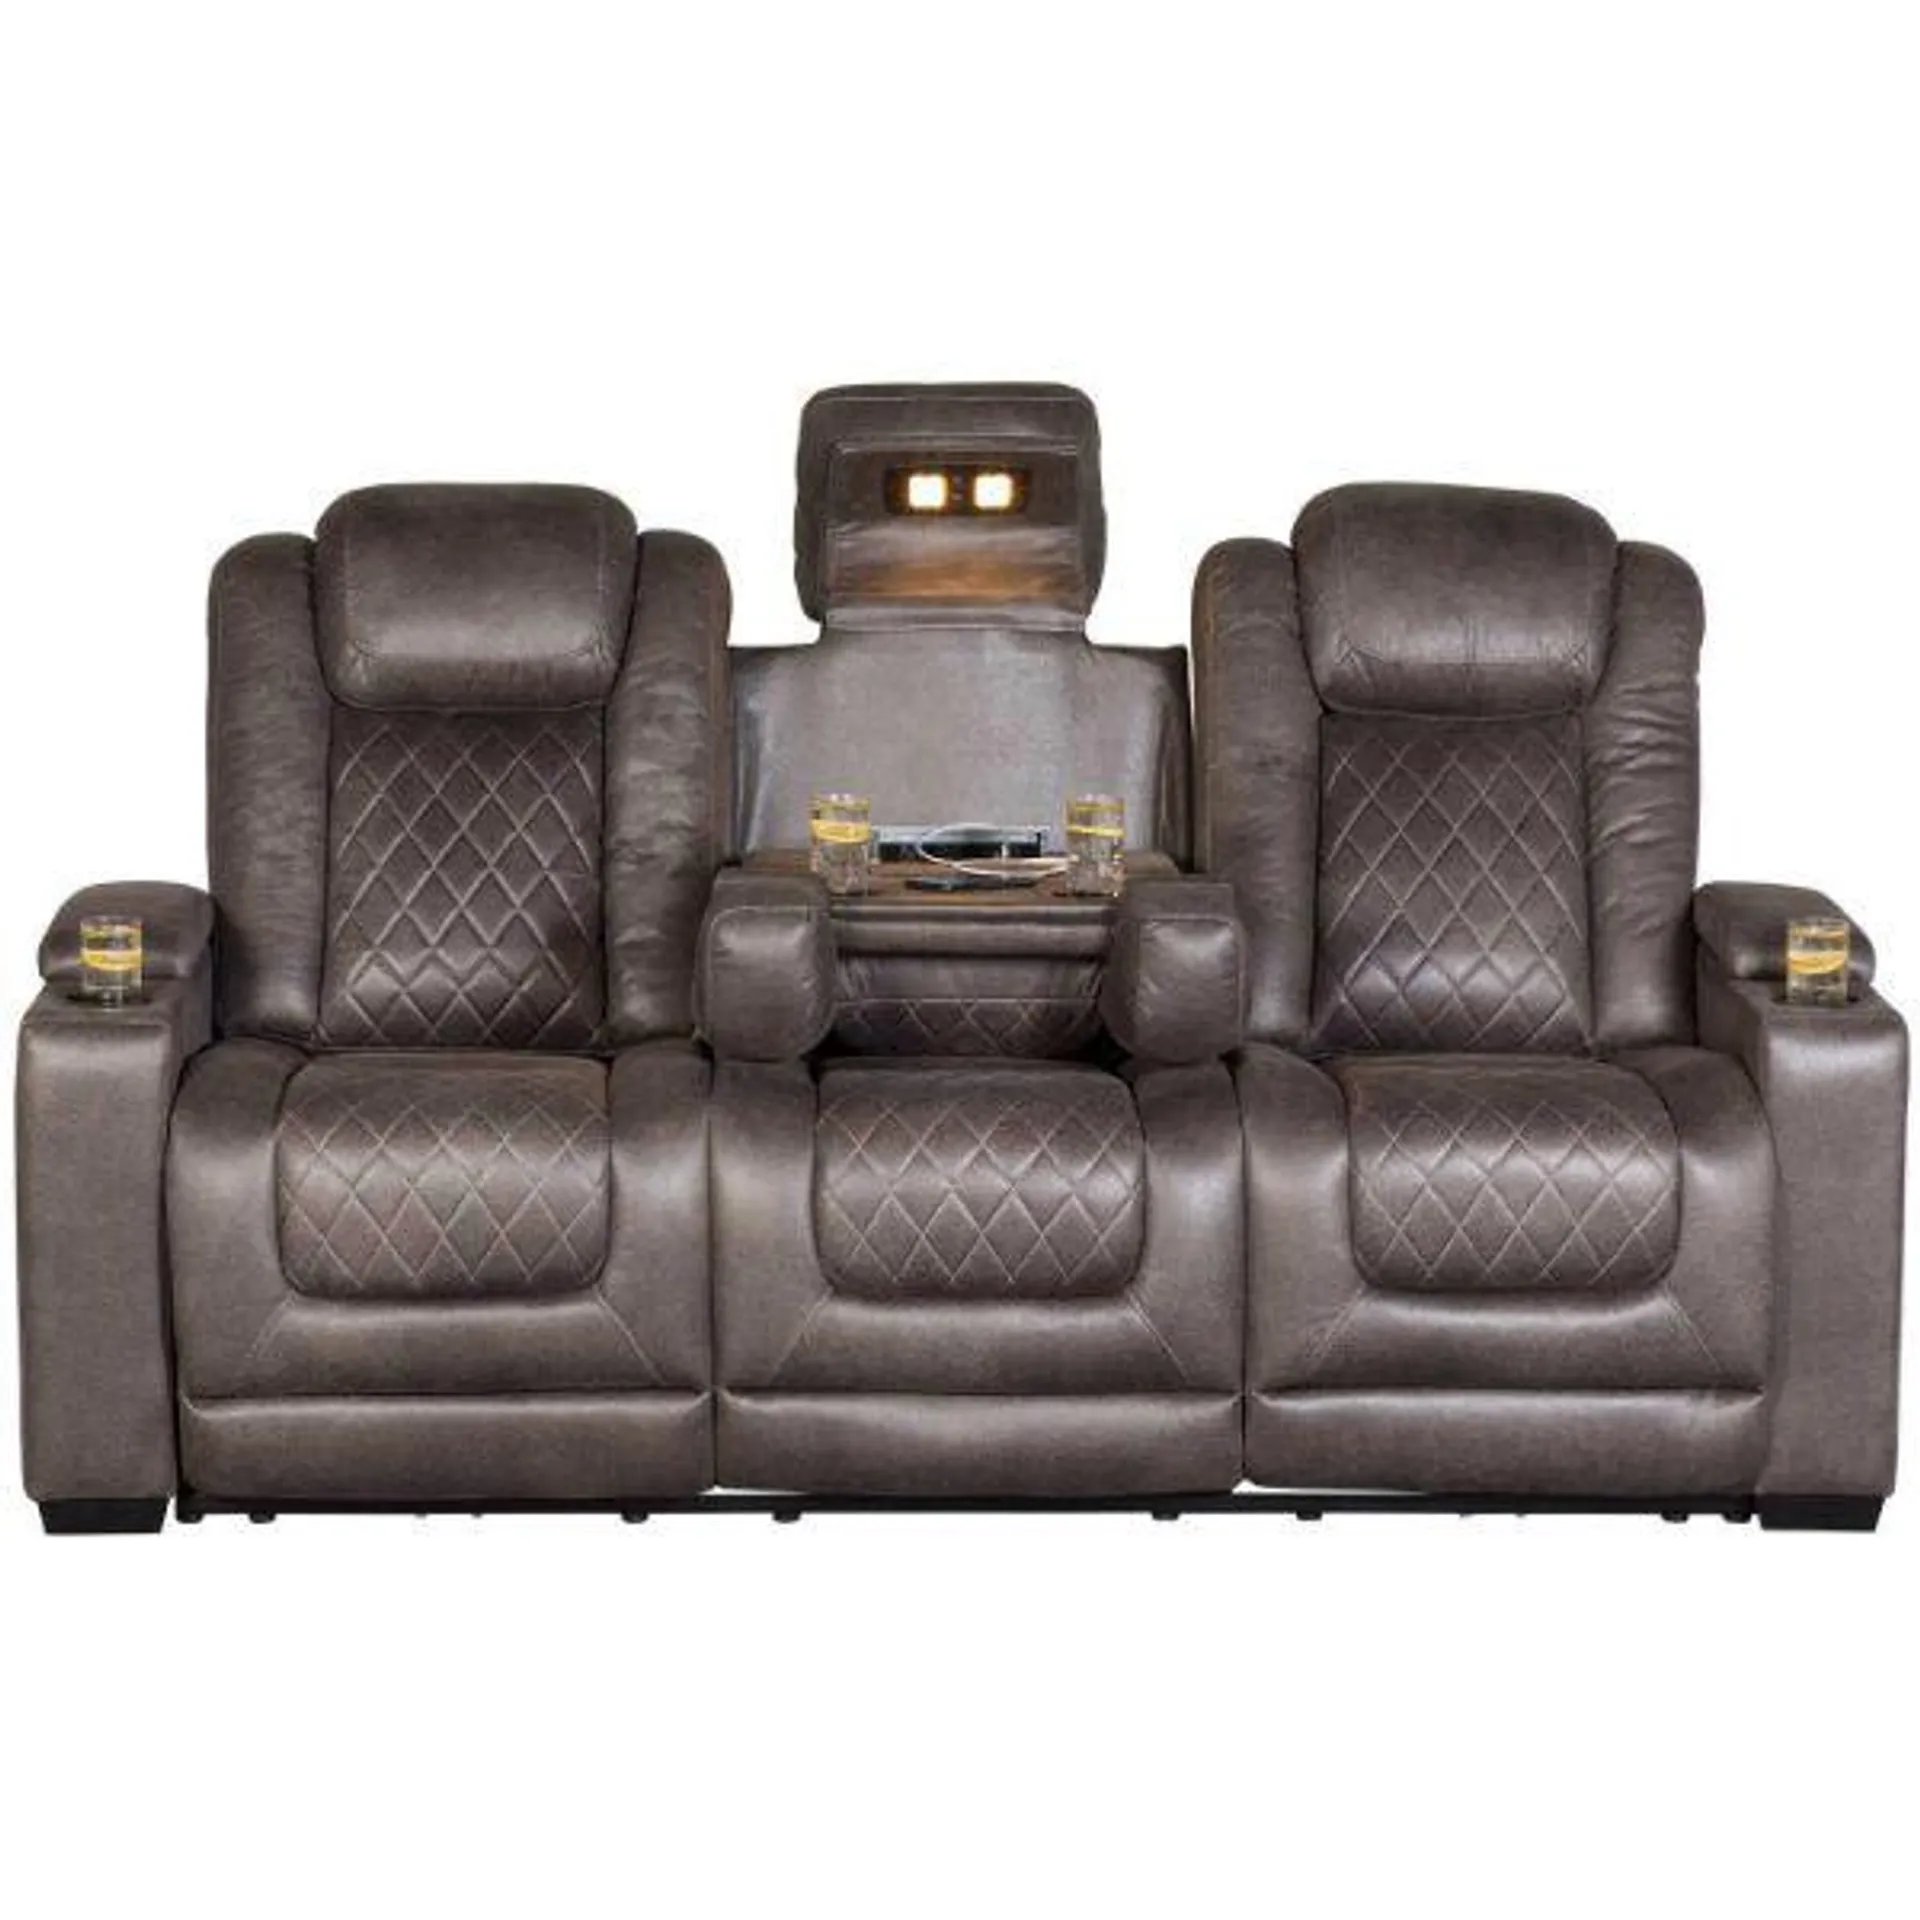 HyllMont P2 Reclining Sofa with Drop Down Table